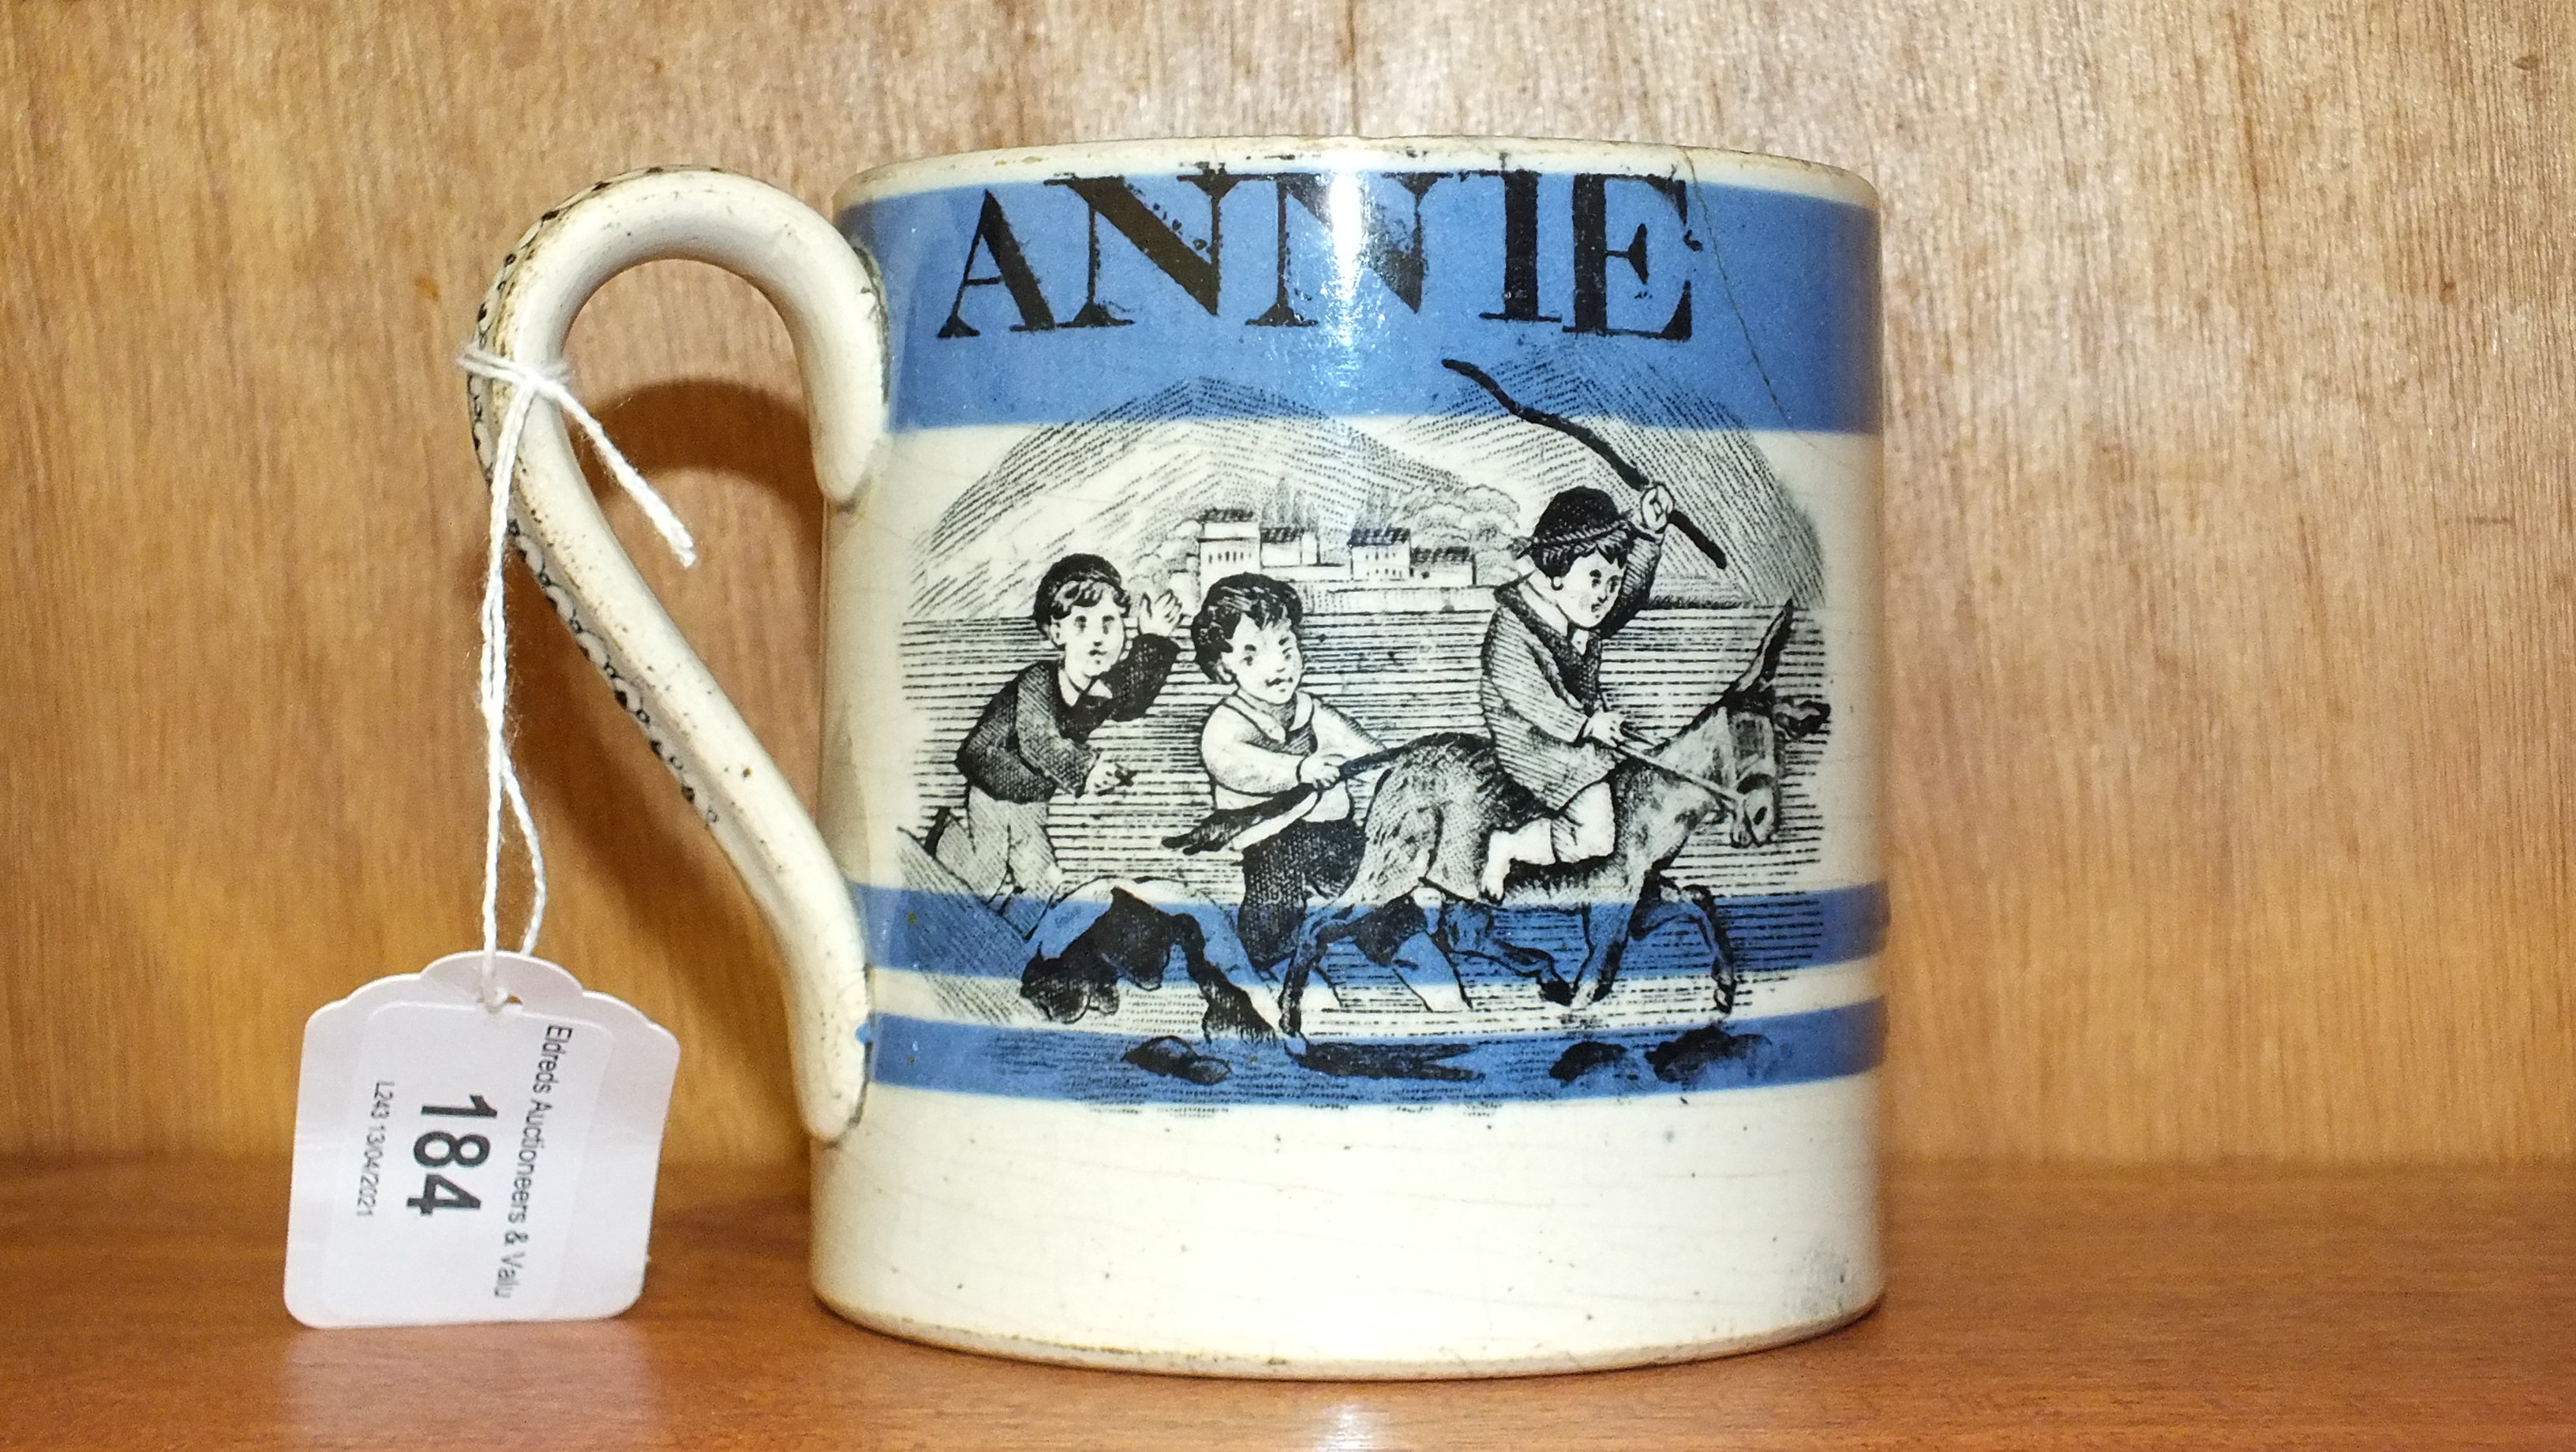 A 19th century Staffordshire mocha ware mug decorated with children playing and with the name 'Annie